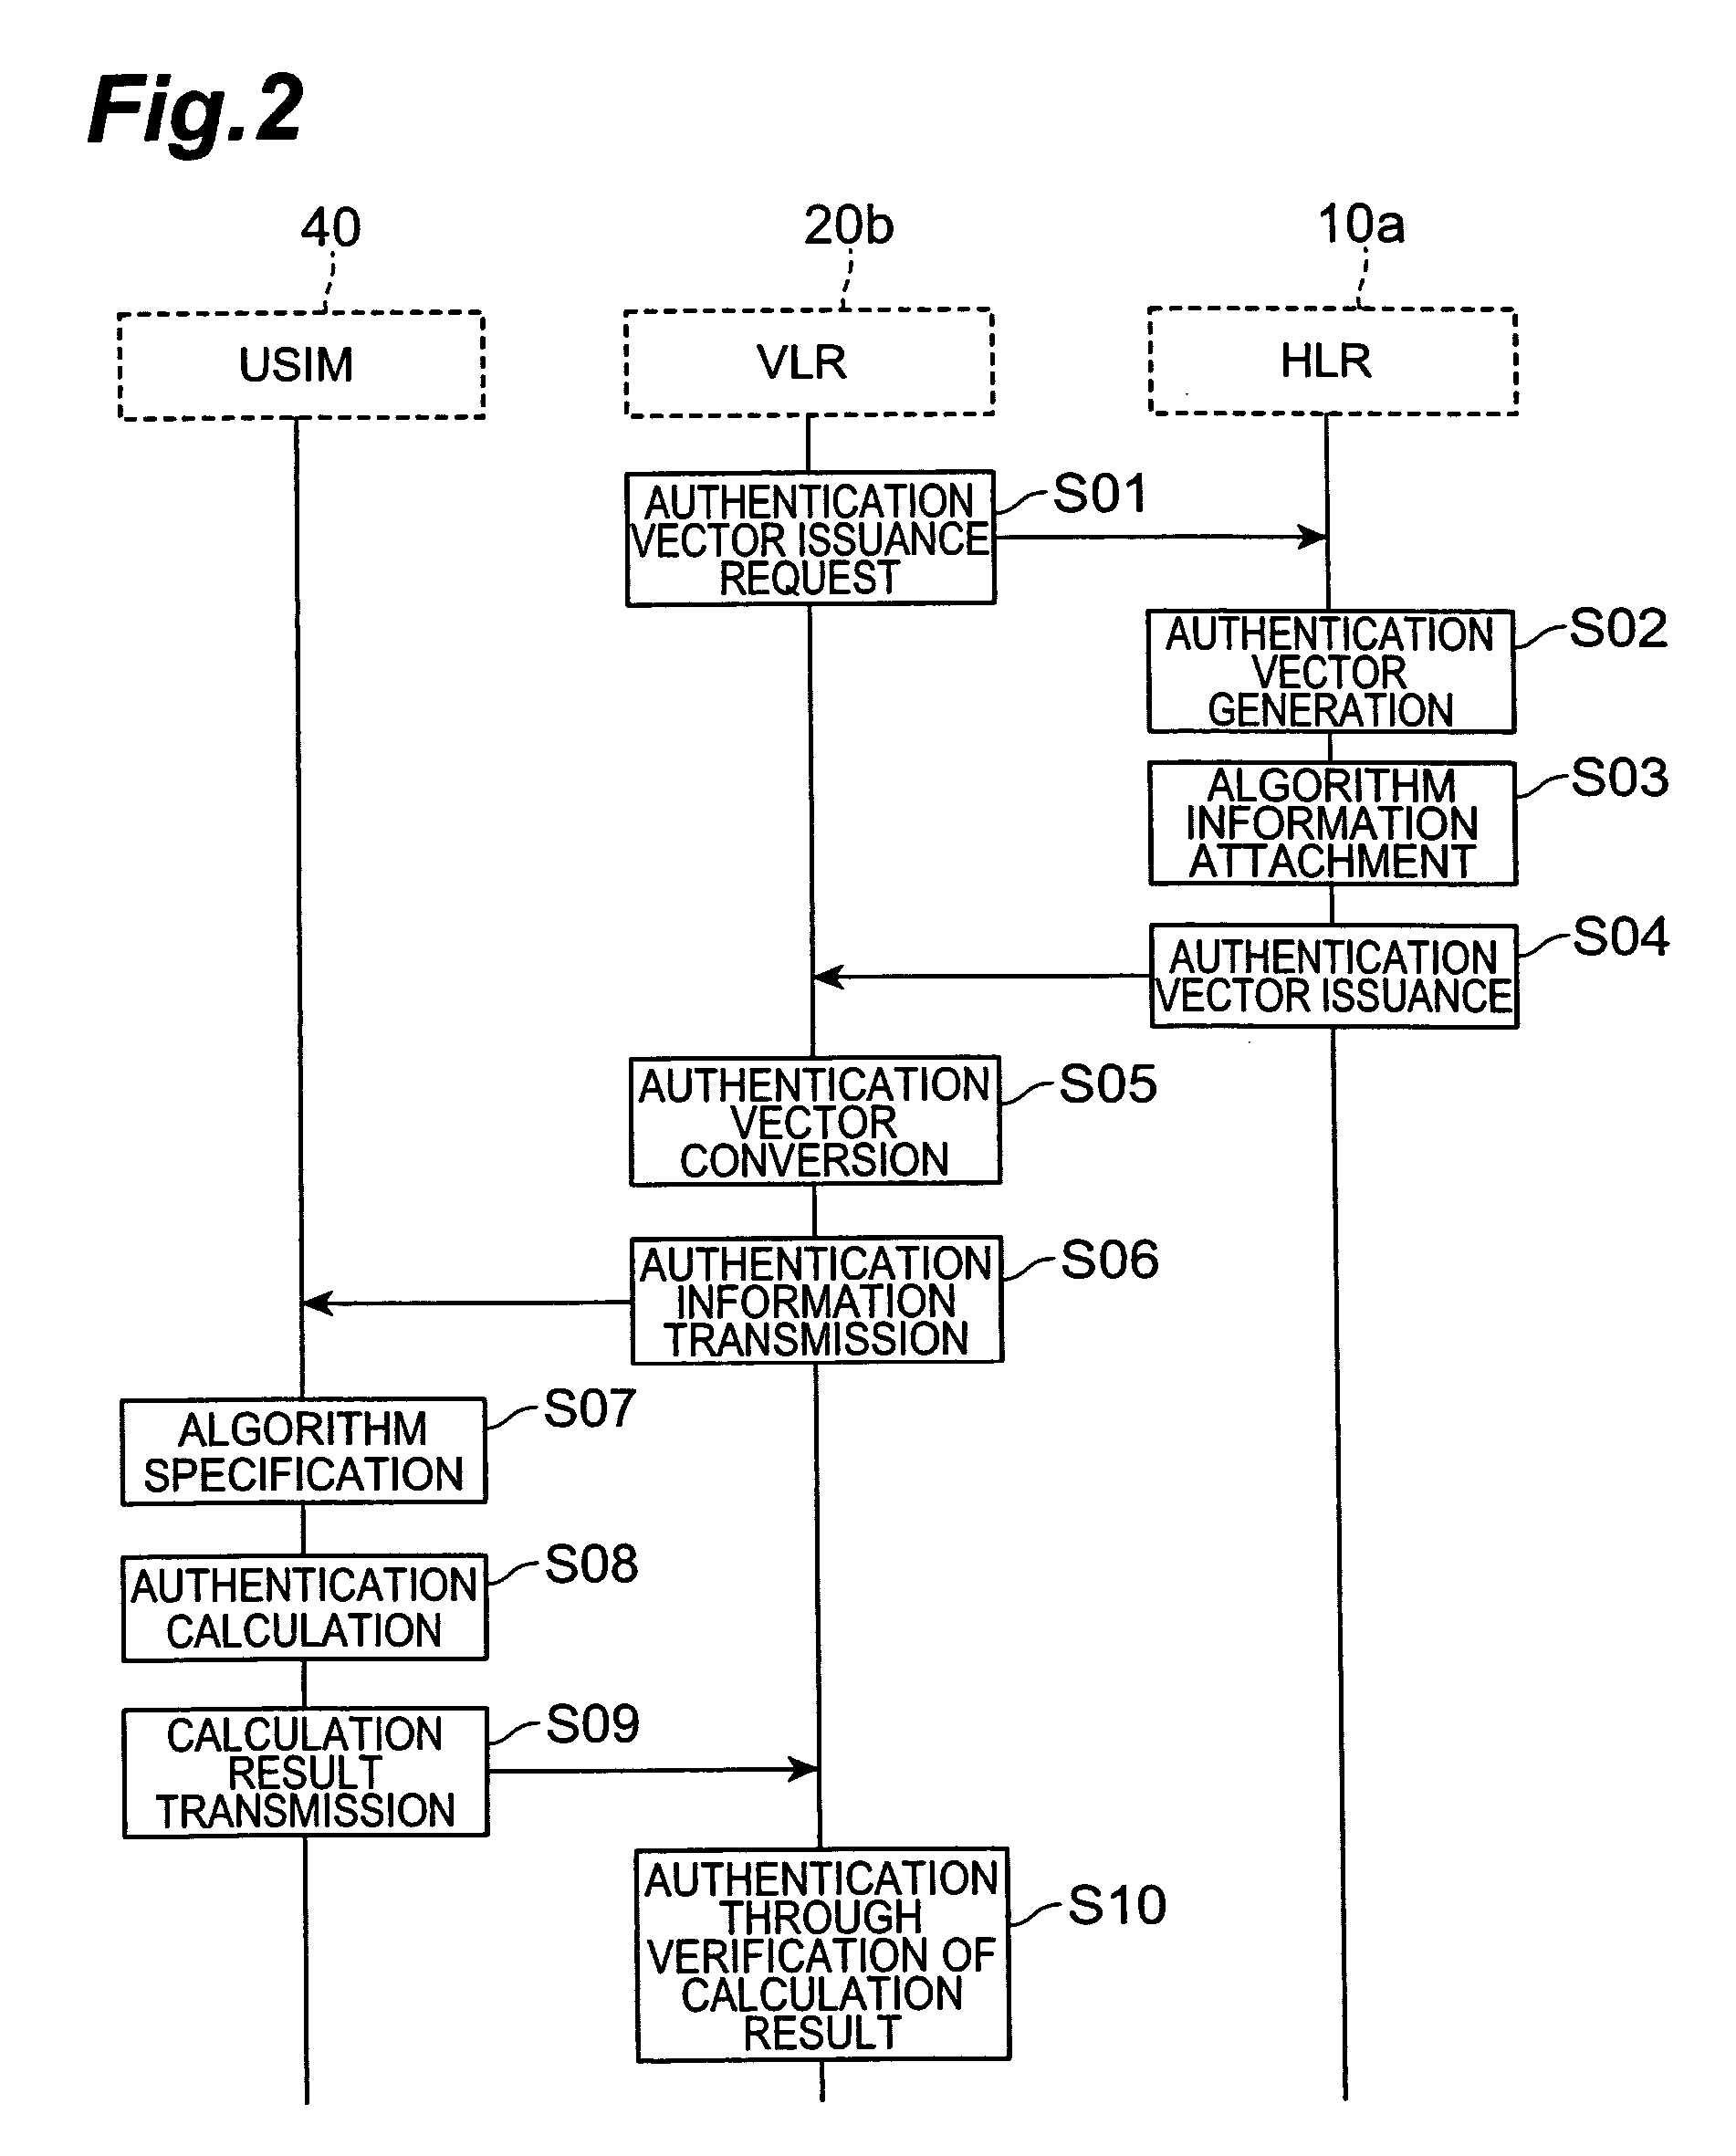 Authentication vector generation device, subscriber identity module, mobile communication system, authentication vector generation method, calculation method, and subscriber authentication method